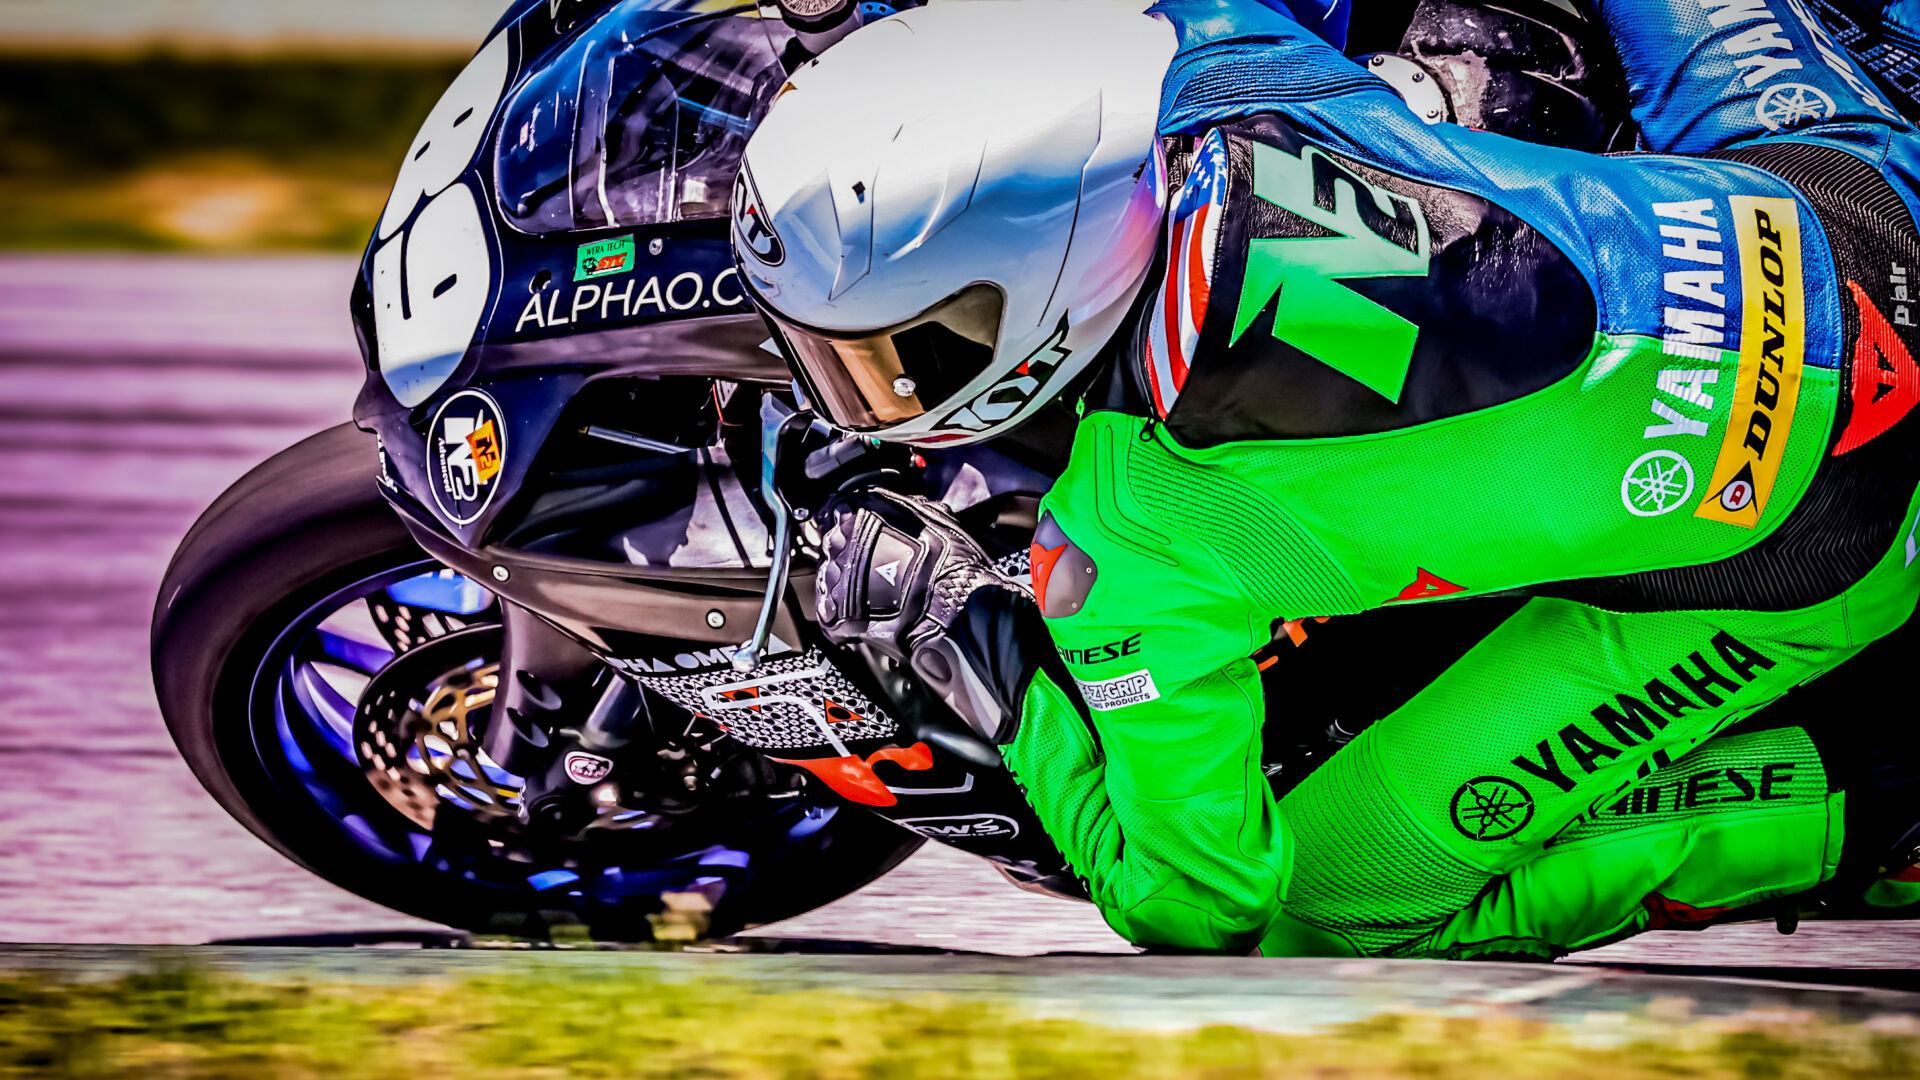 Blake Davis (89) on the Alpha Omega Rollers Yamaha YZF-R1. Photo by Apex Pro Photo, courtesy N2 Racing.